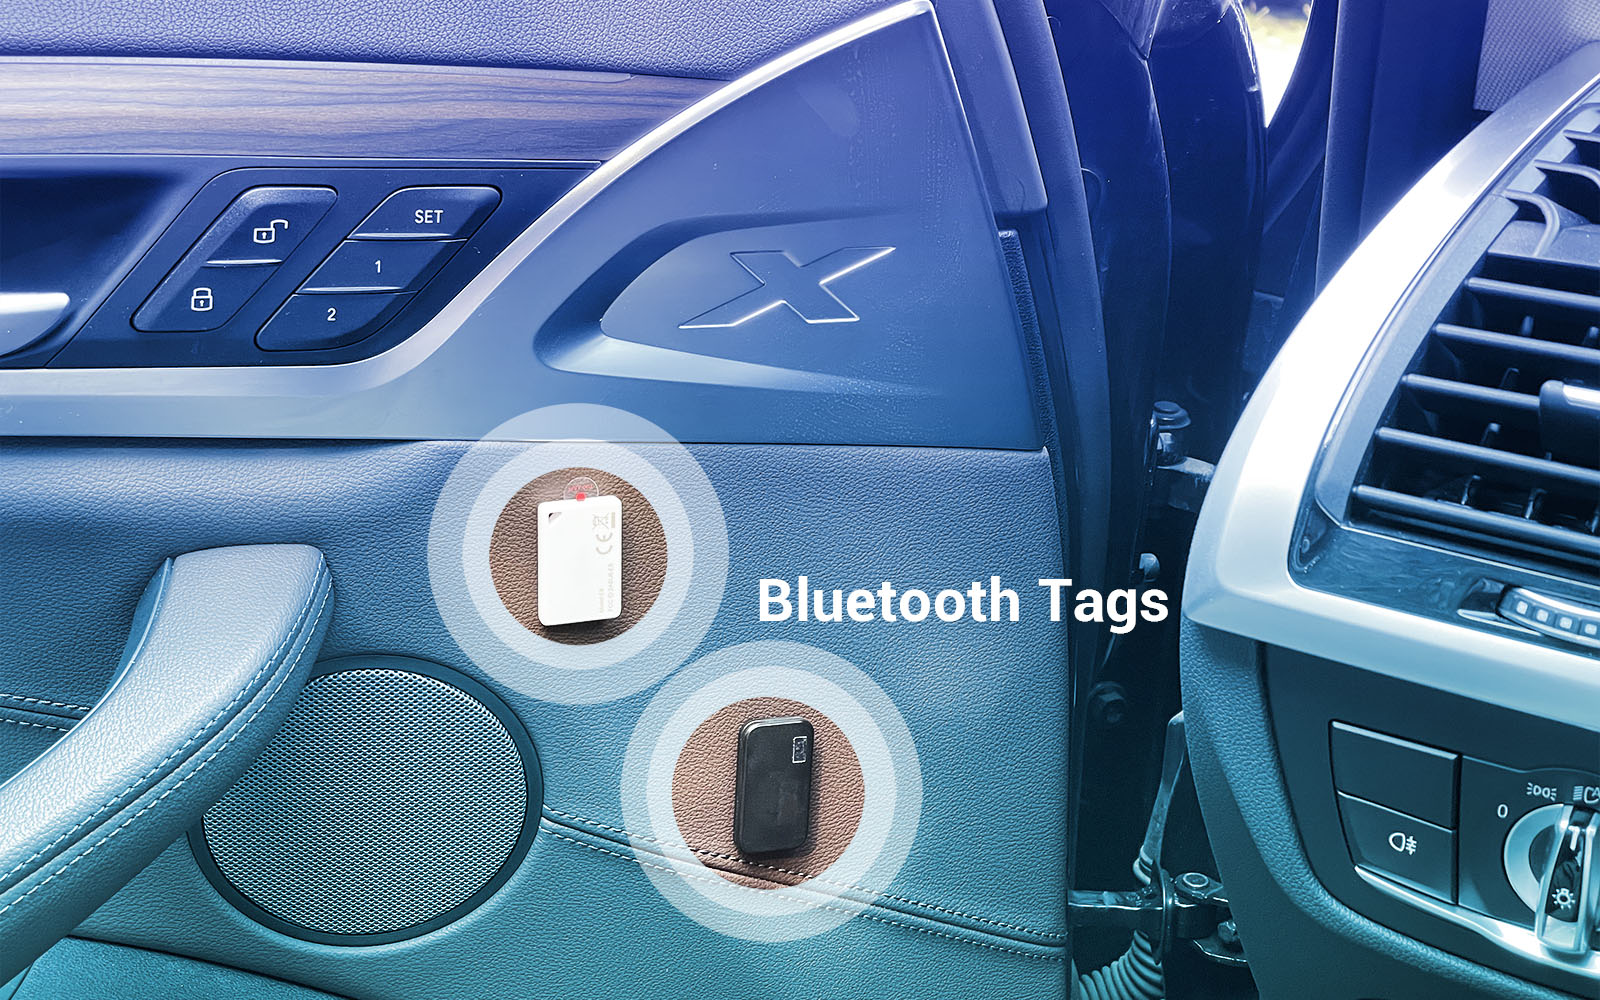 Install a Bluetooth Beacon in the car